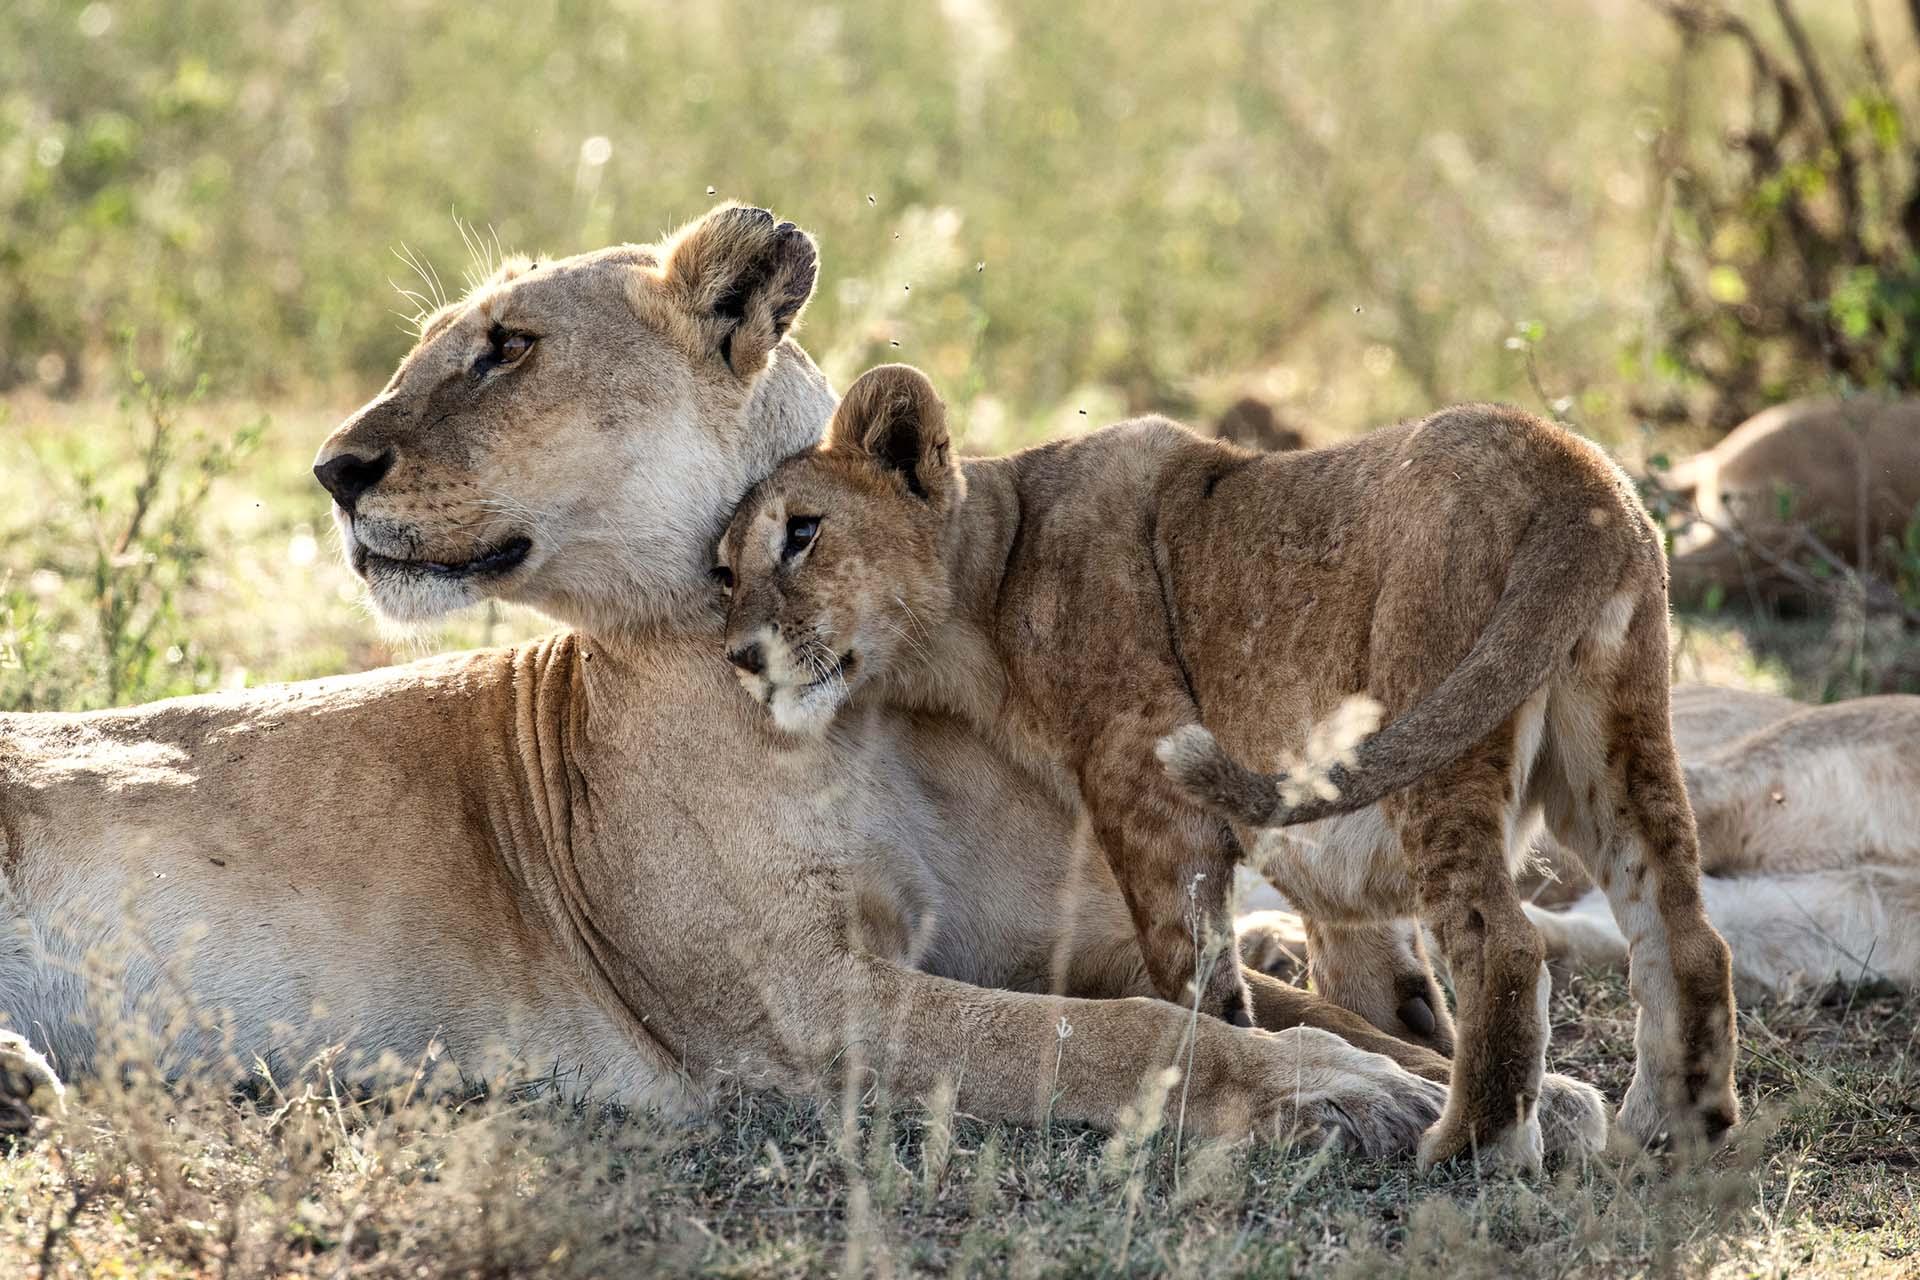 the Serengeti is thought to hold the largest lion population in Africa due in part to the abundance of prey species. More than 3,000 lions live in this ecosystem